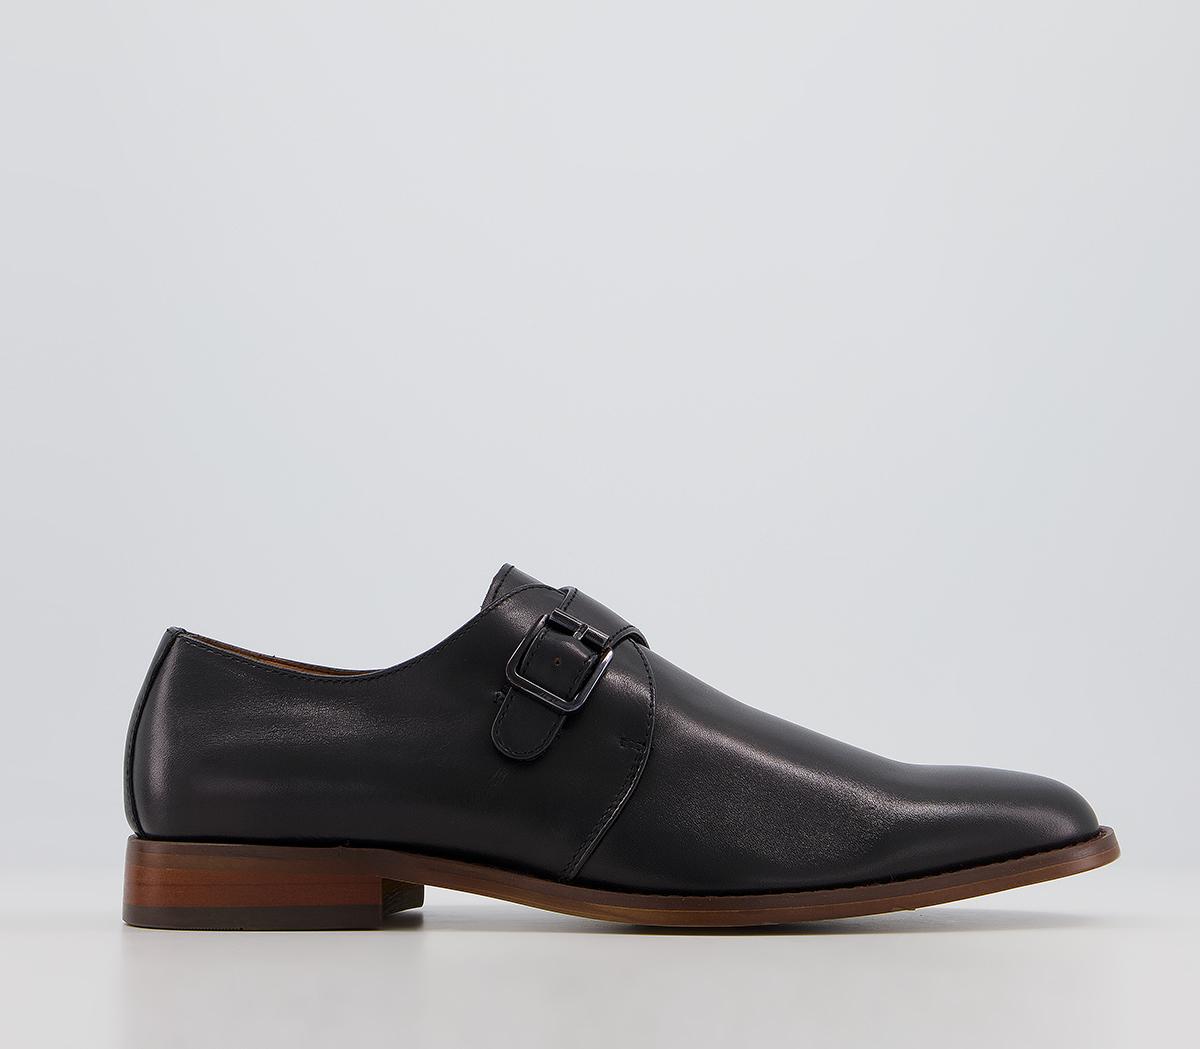 OFFICEMaster Single Strap Monk ShoesBlack Leather